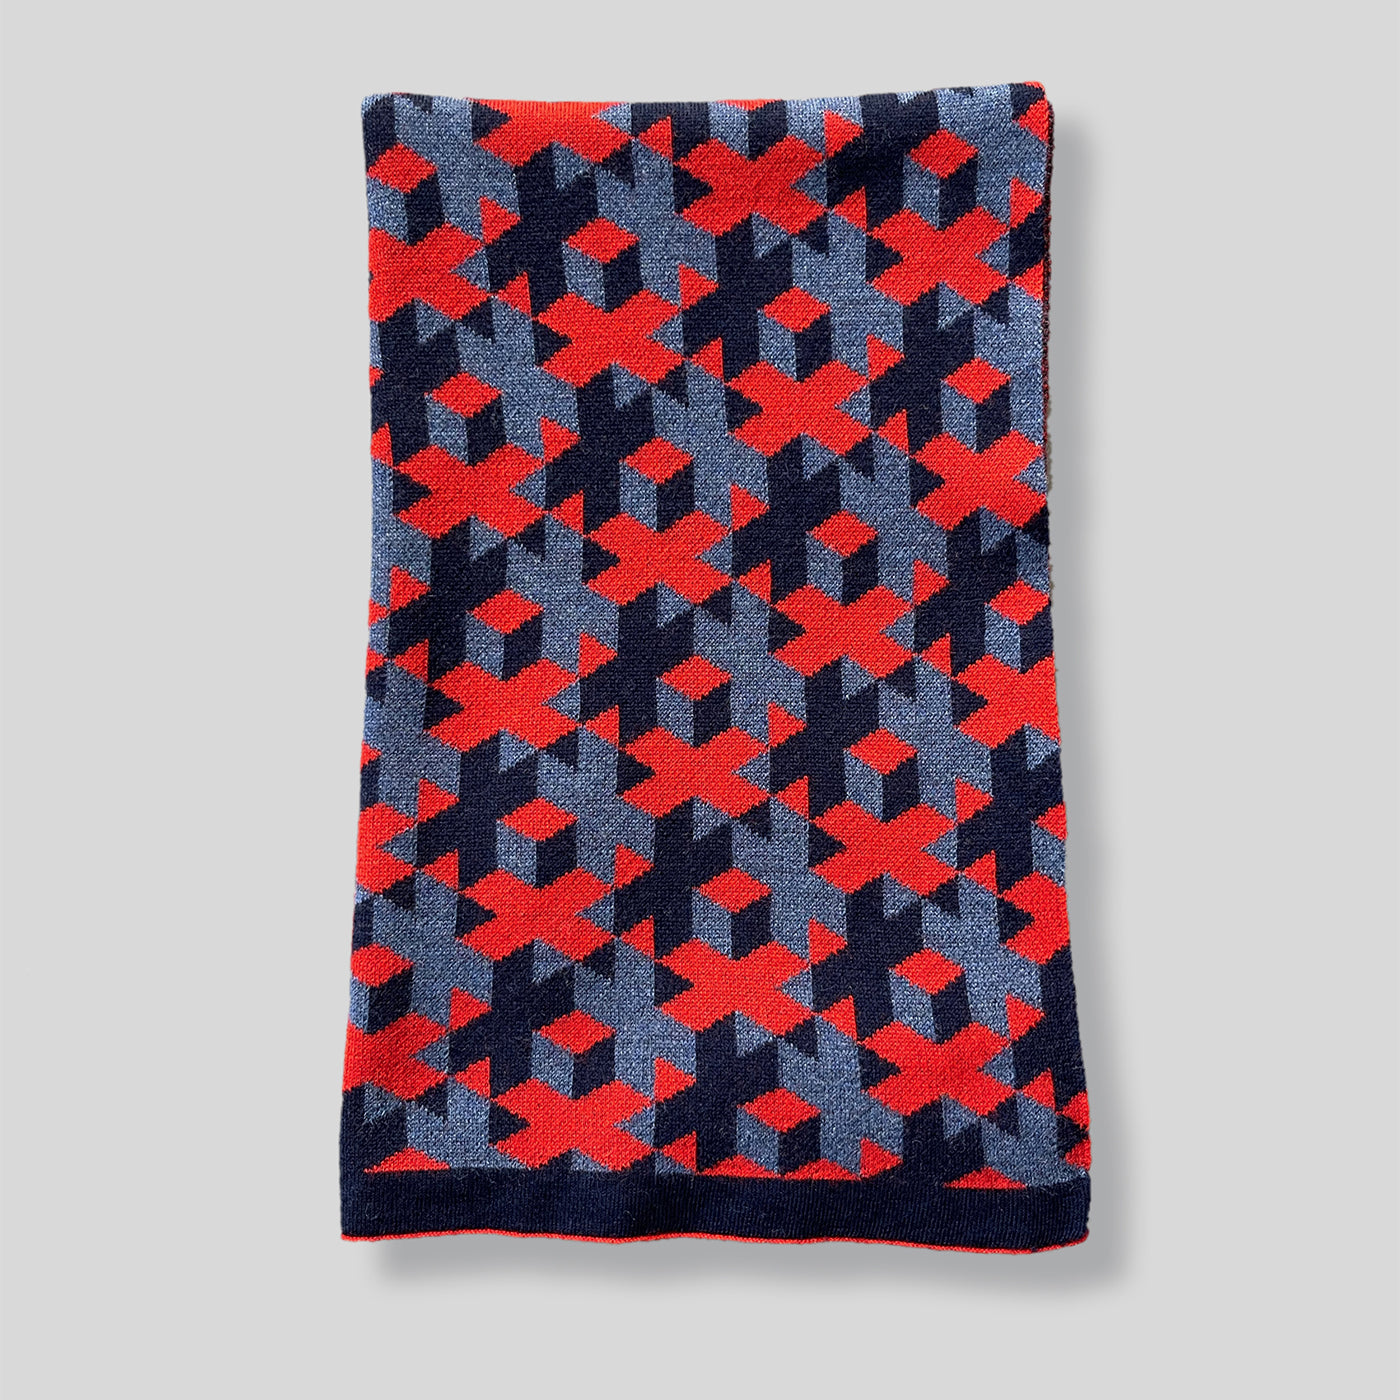 Plaid Lana 01 Patterned Red & Gray Blanket by Giulio Iacchetti - Alternative view 1